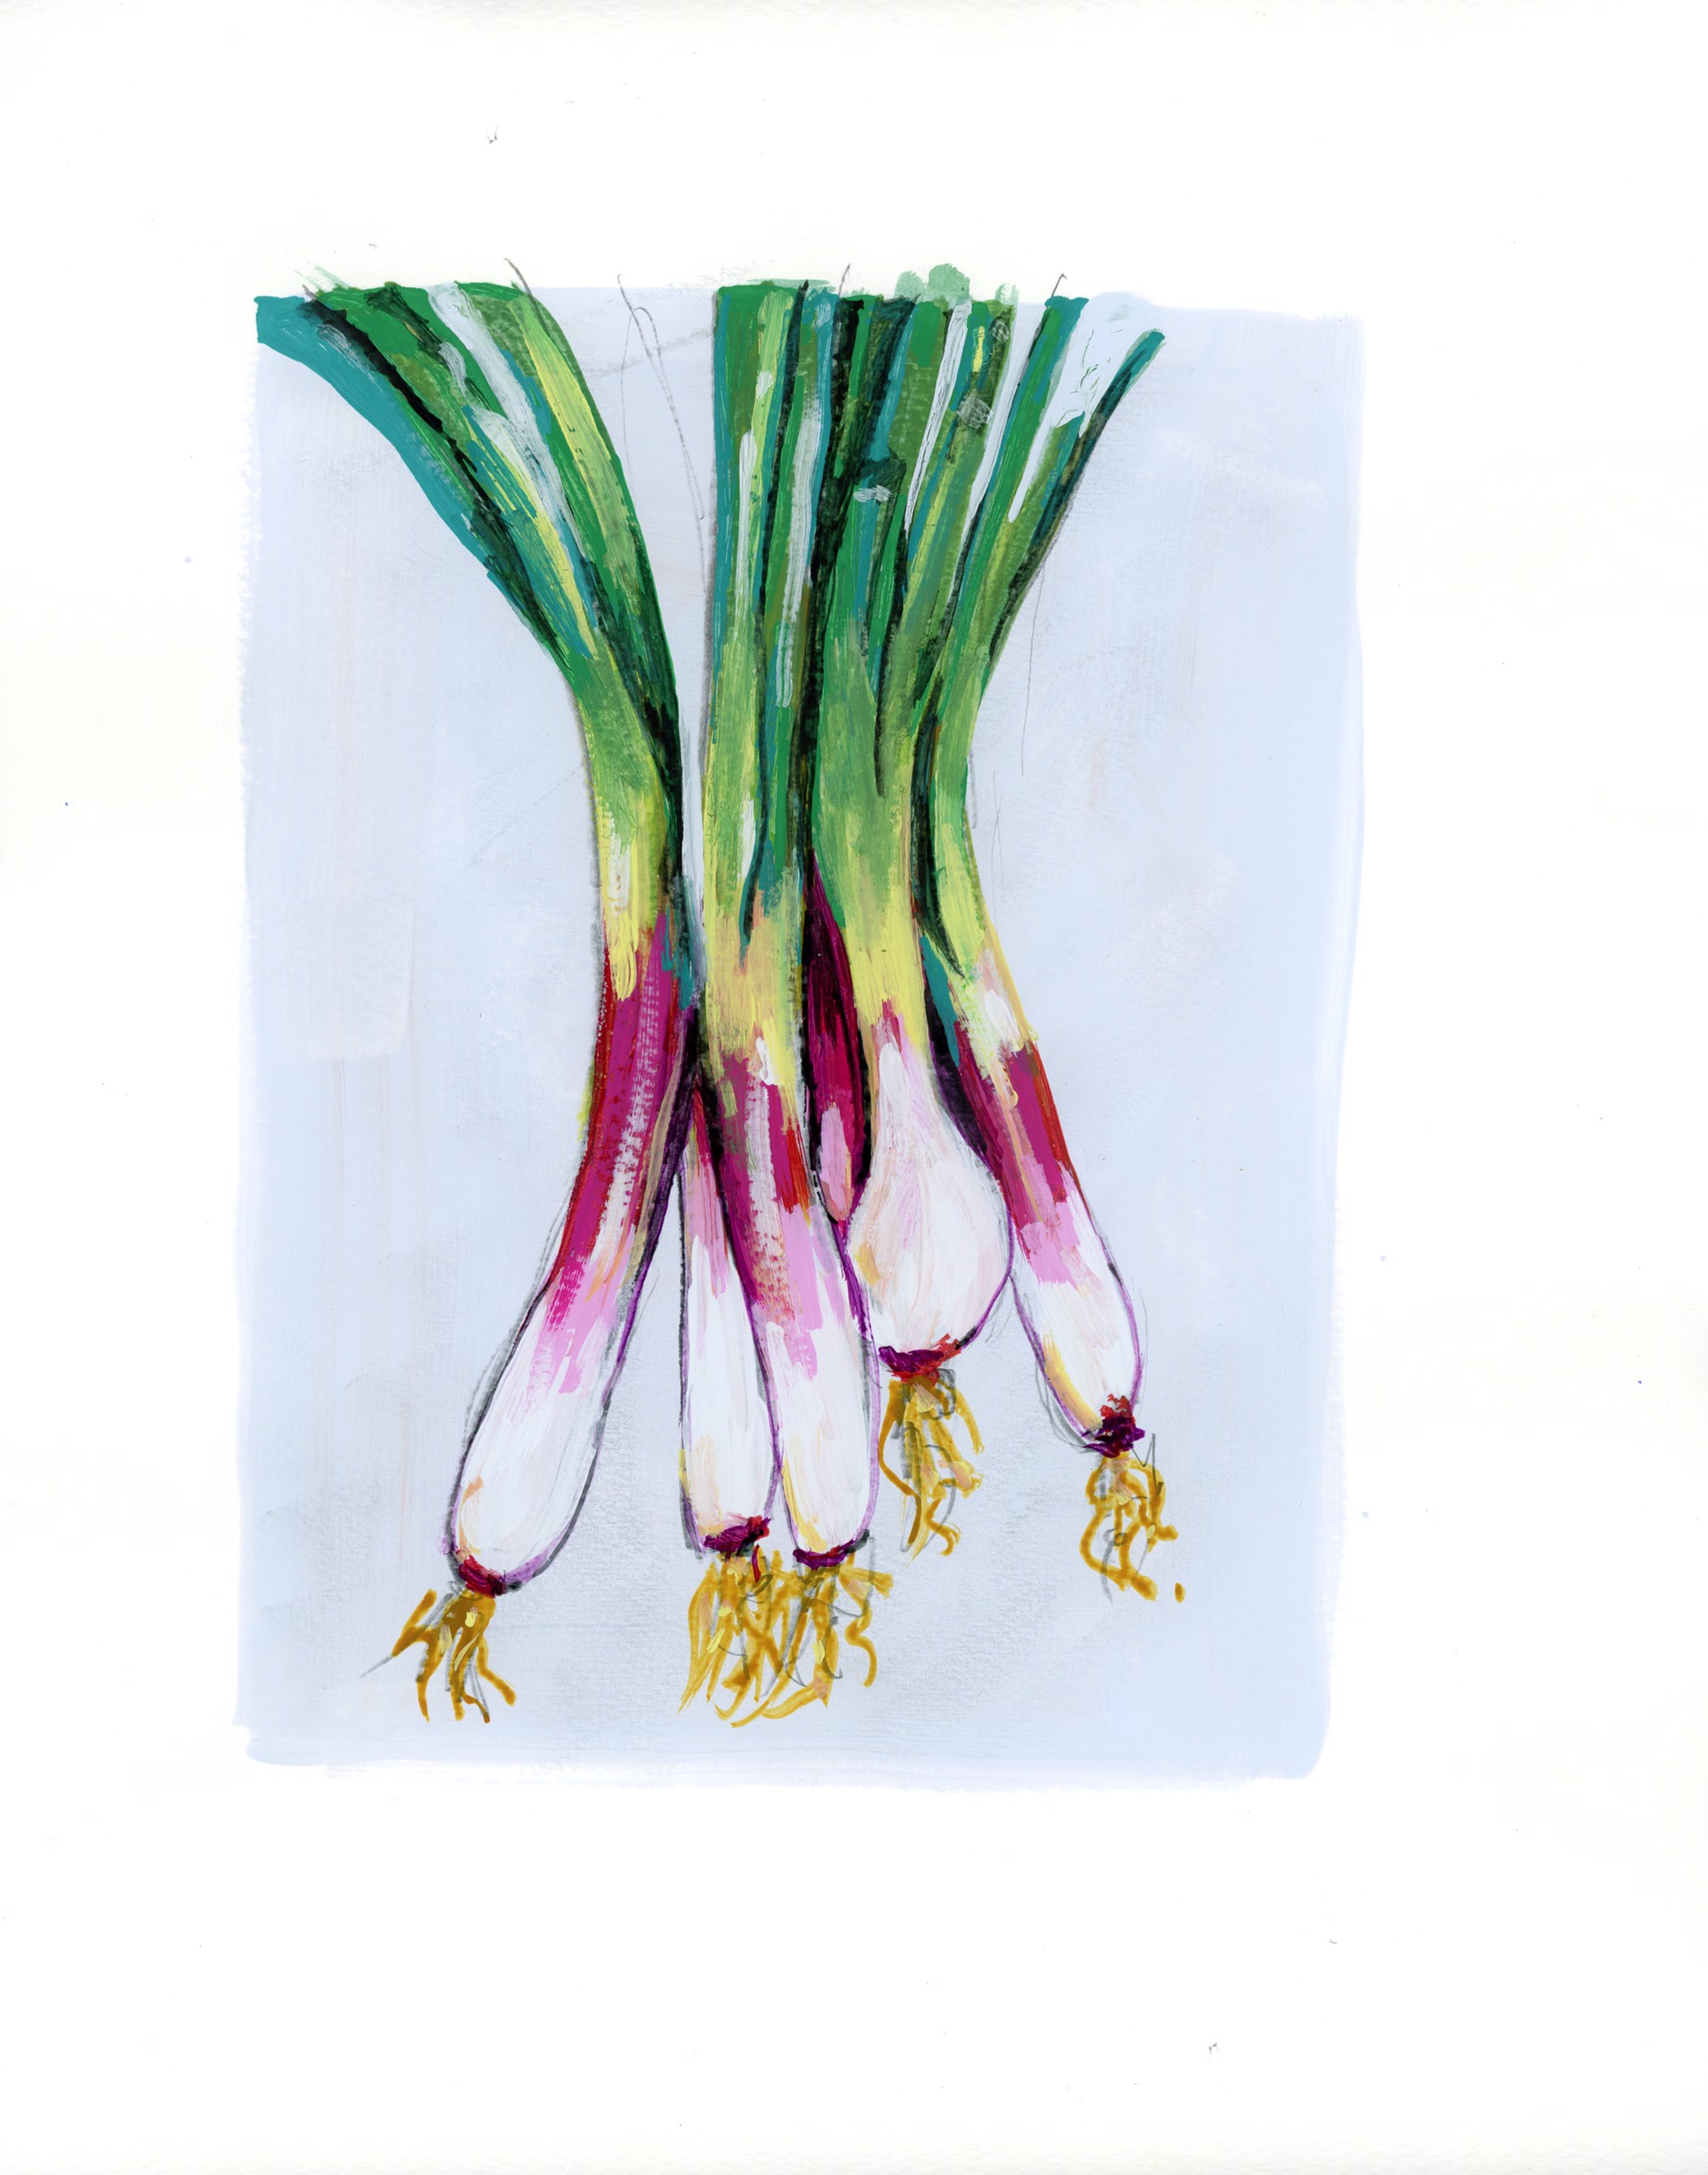 Spring Onions by Rachael Nerney